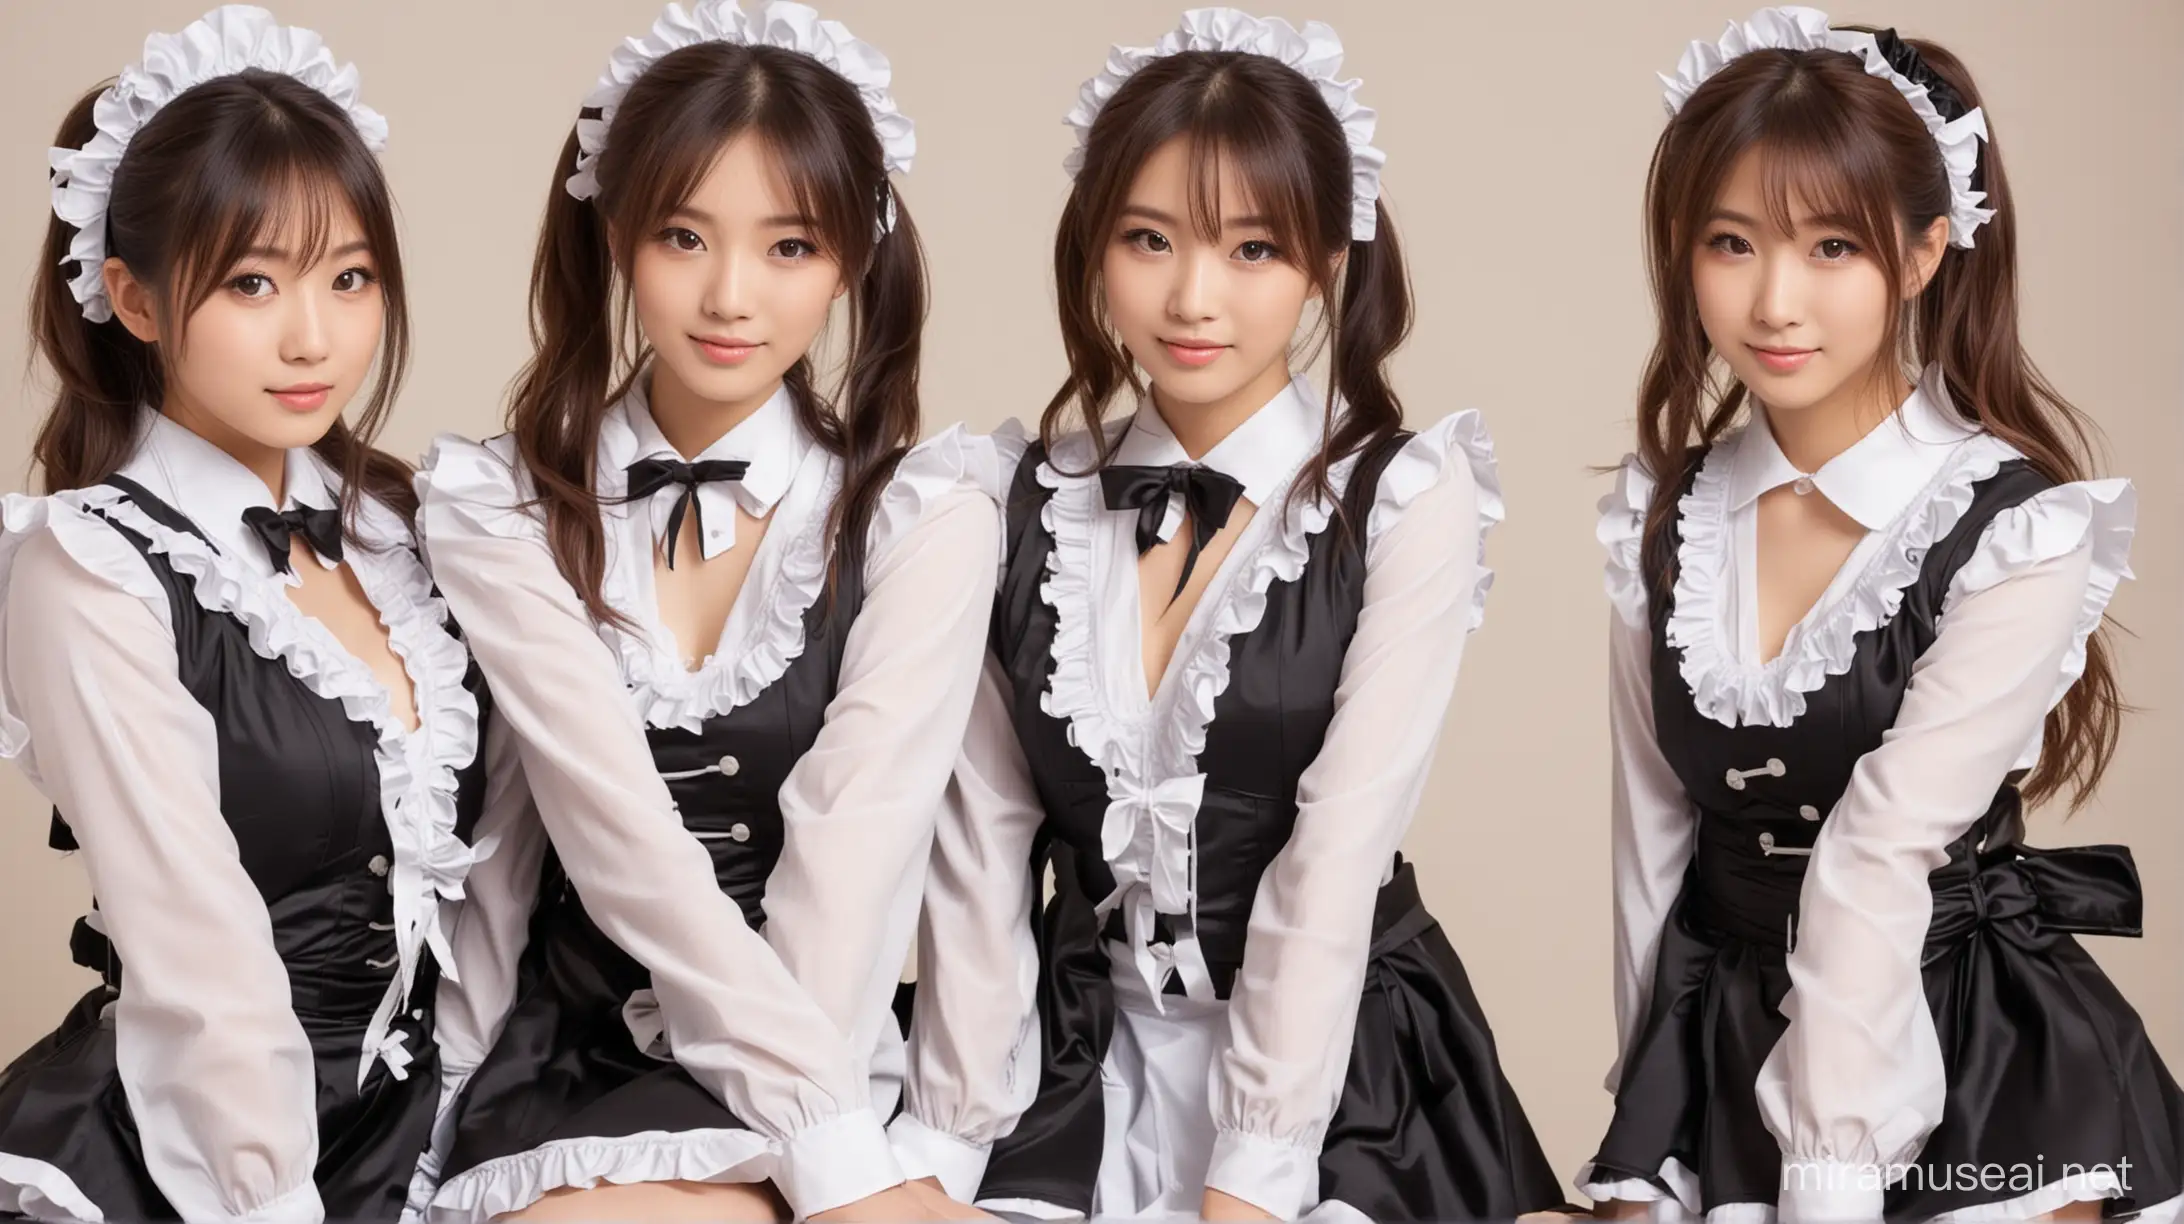 Sensual Curiosity with Pretty Japanese Maids in Black and White Uniforms